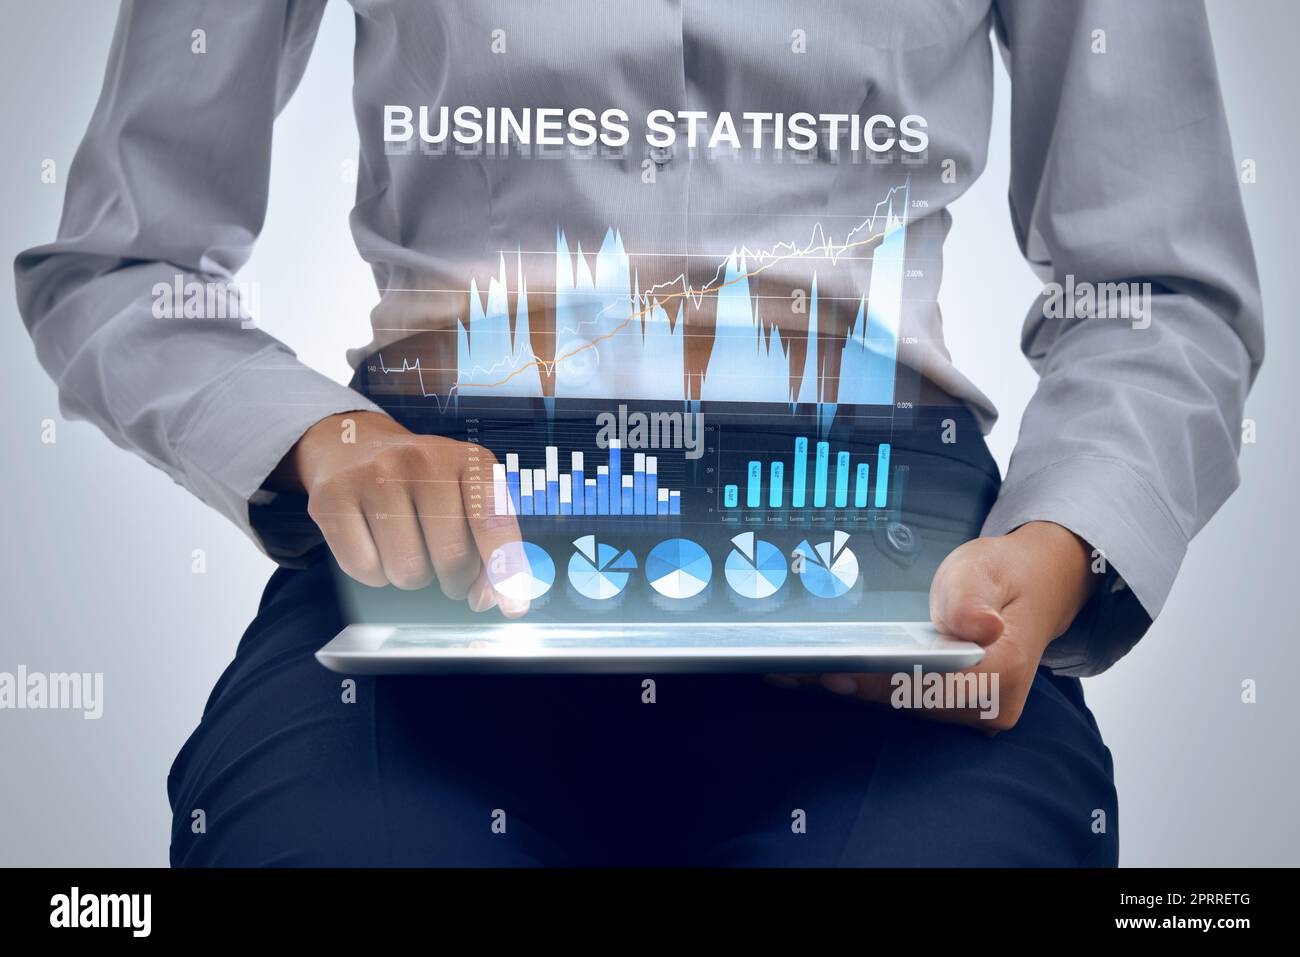 Analyzing business data with the help of technology. a businesswoman using a digital tablet to analyze financial data. Stock Photo